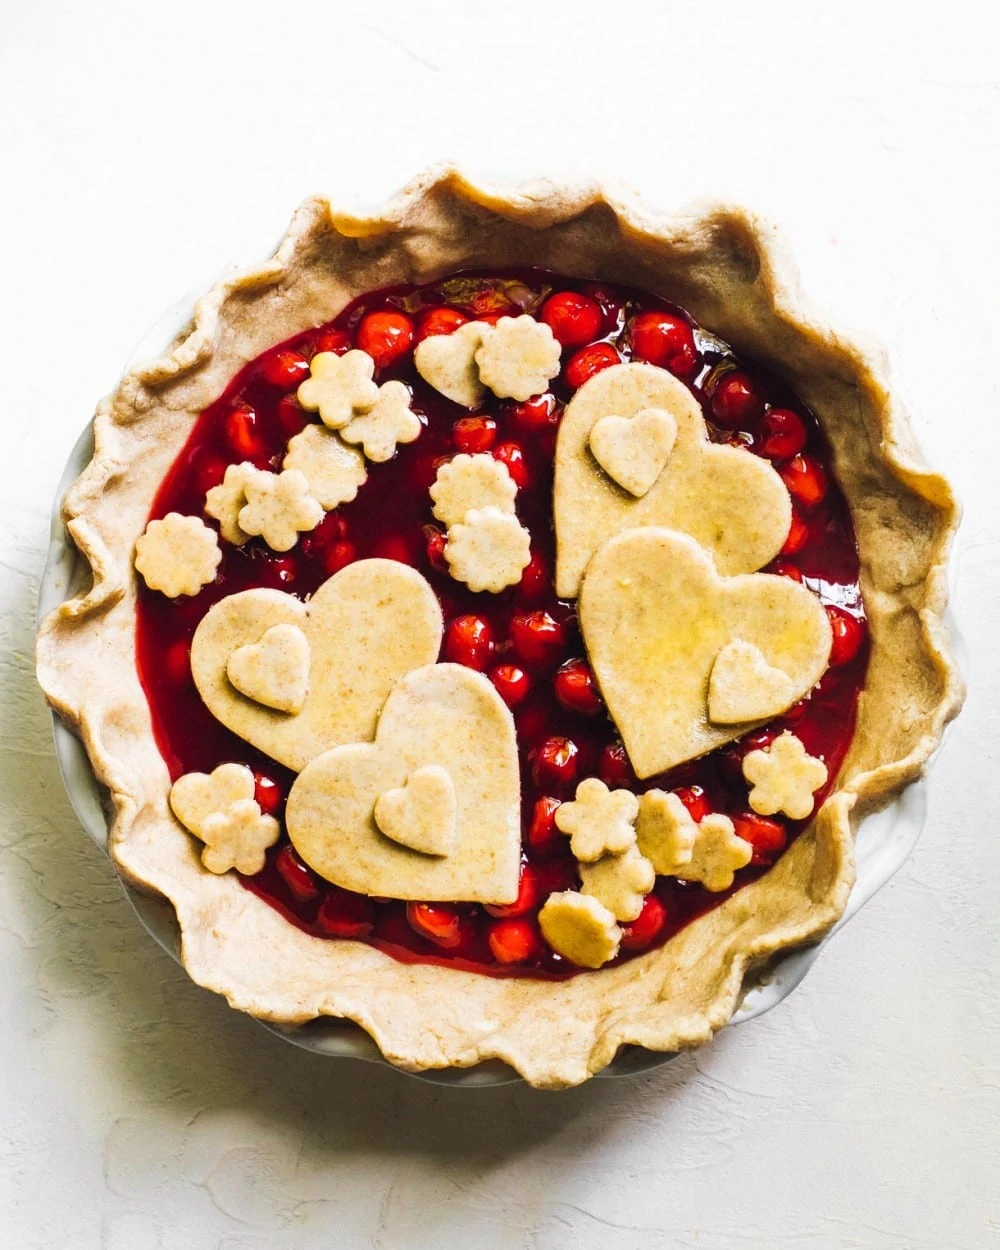 unbaked gluten free cherry pie with hearts on top for the pie crust